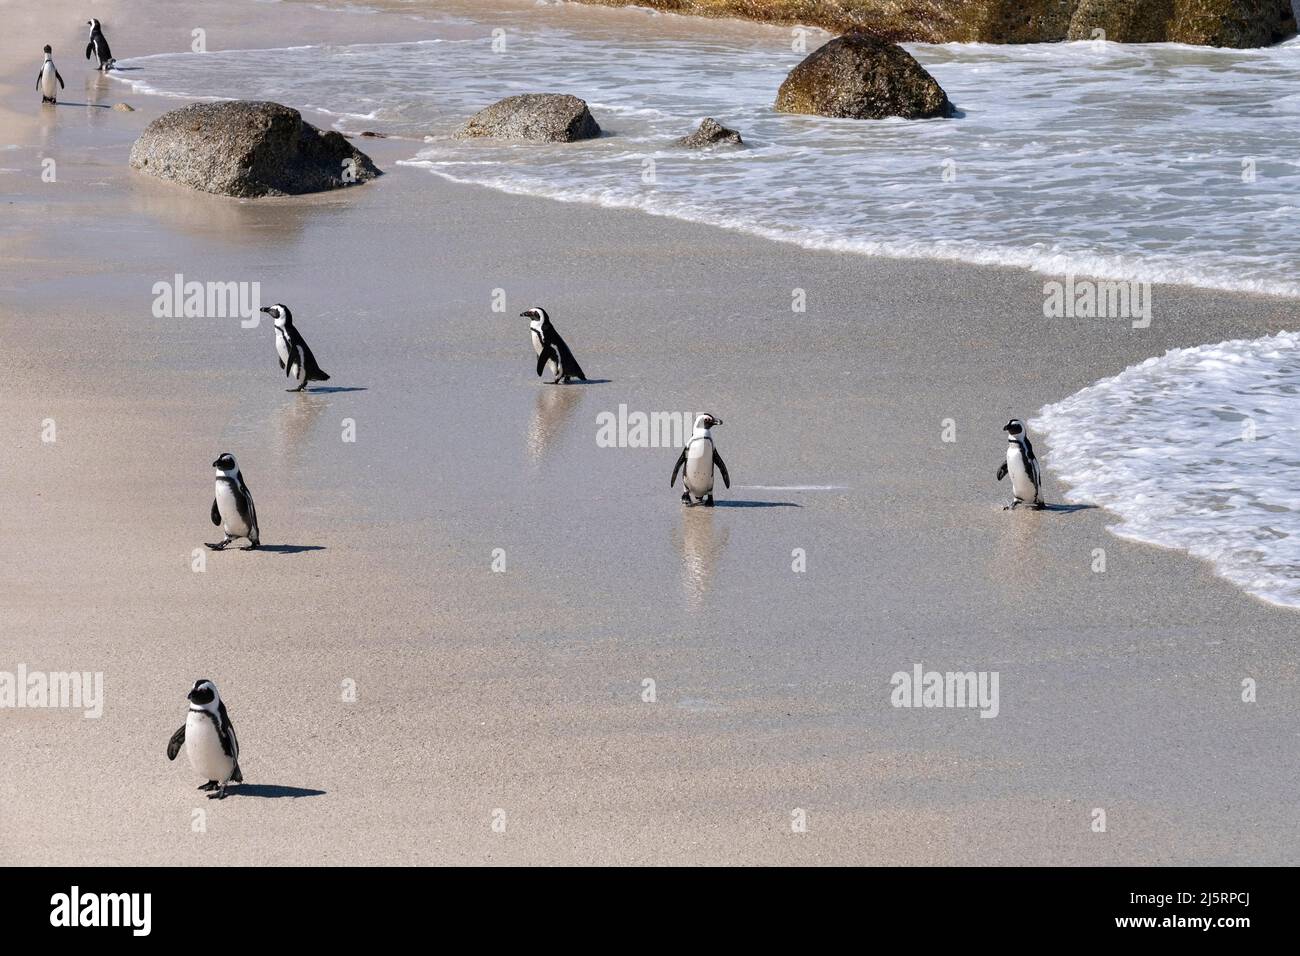 Cape penguins / South African penguin (Spheniscus demersus) colony at Boulders Beach, Simon's Town, Western Cape, South Africa Stock Photo